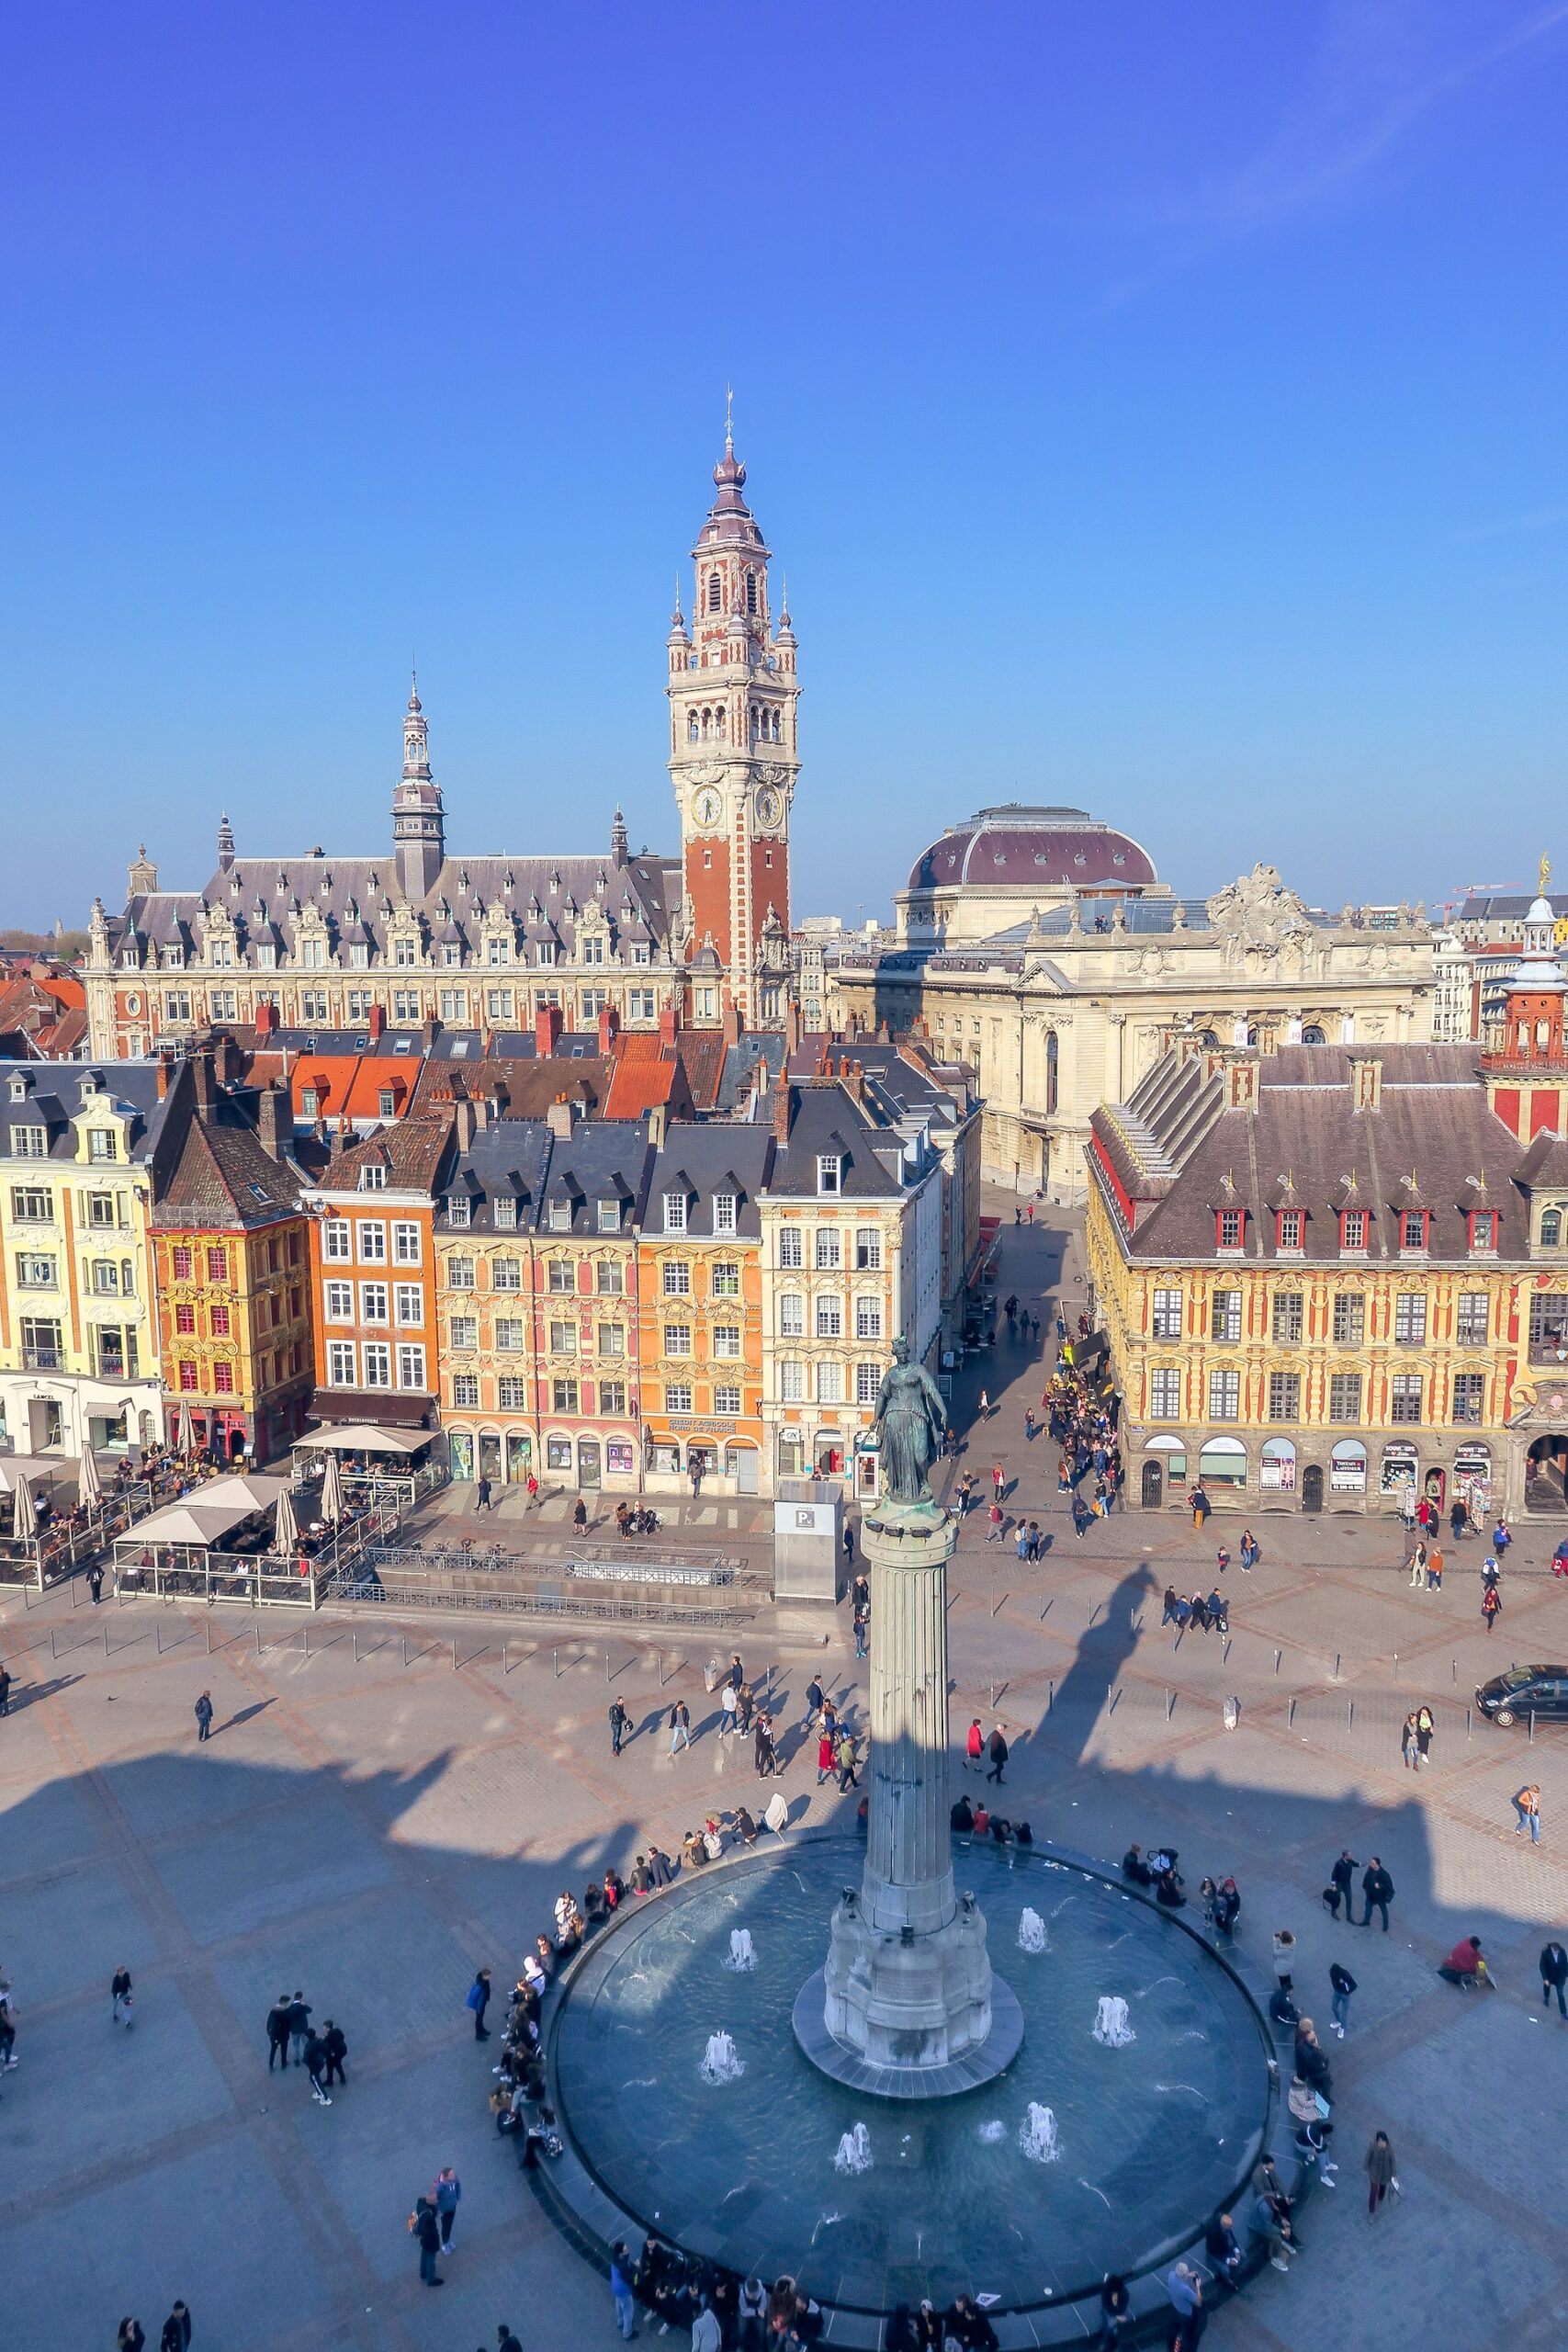 View of the main square in Lille